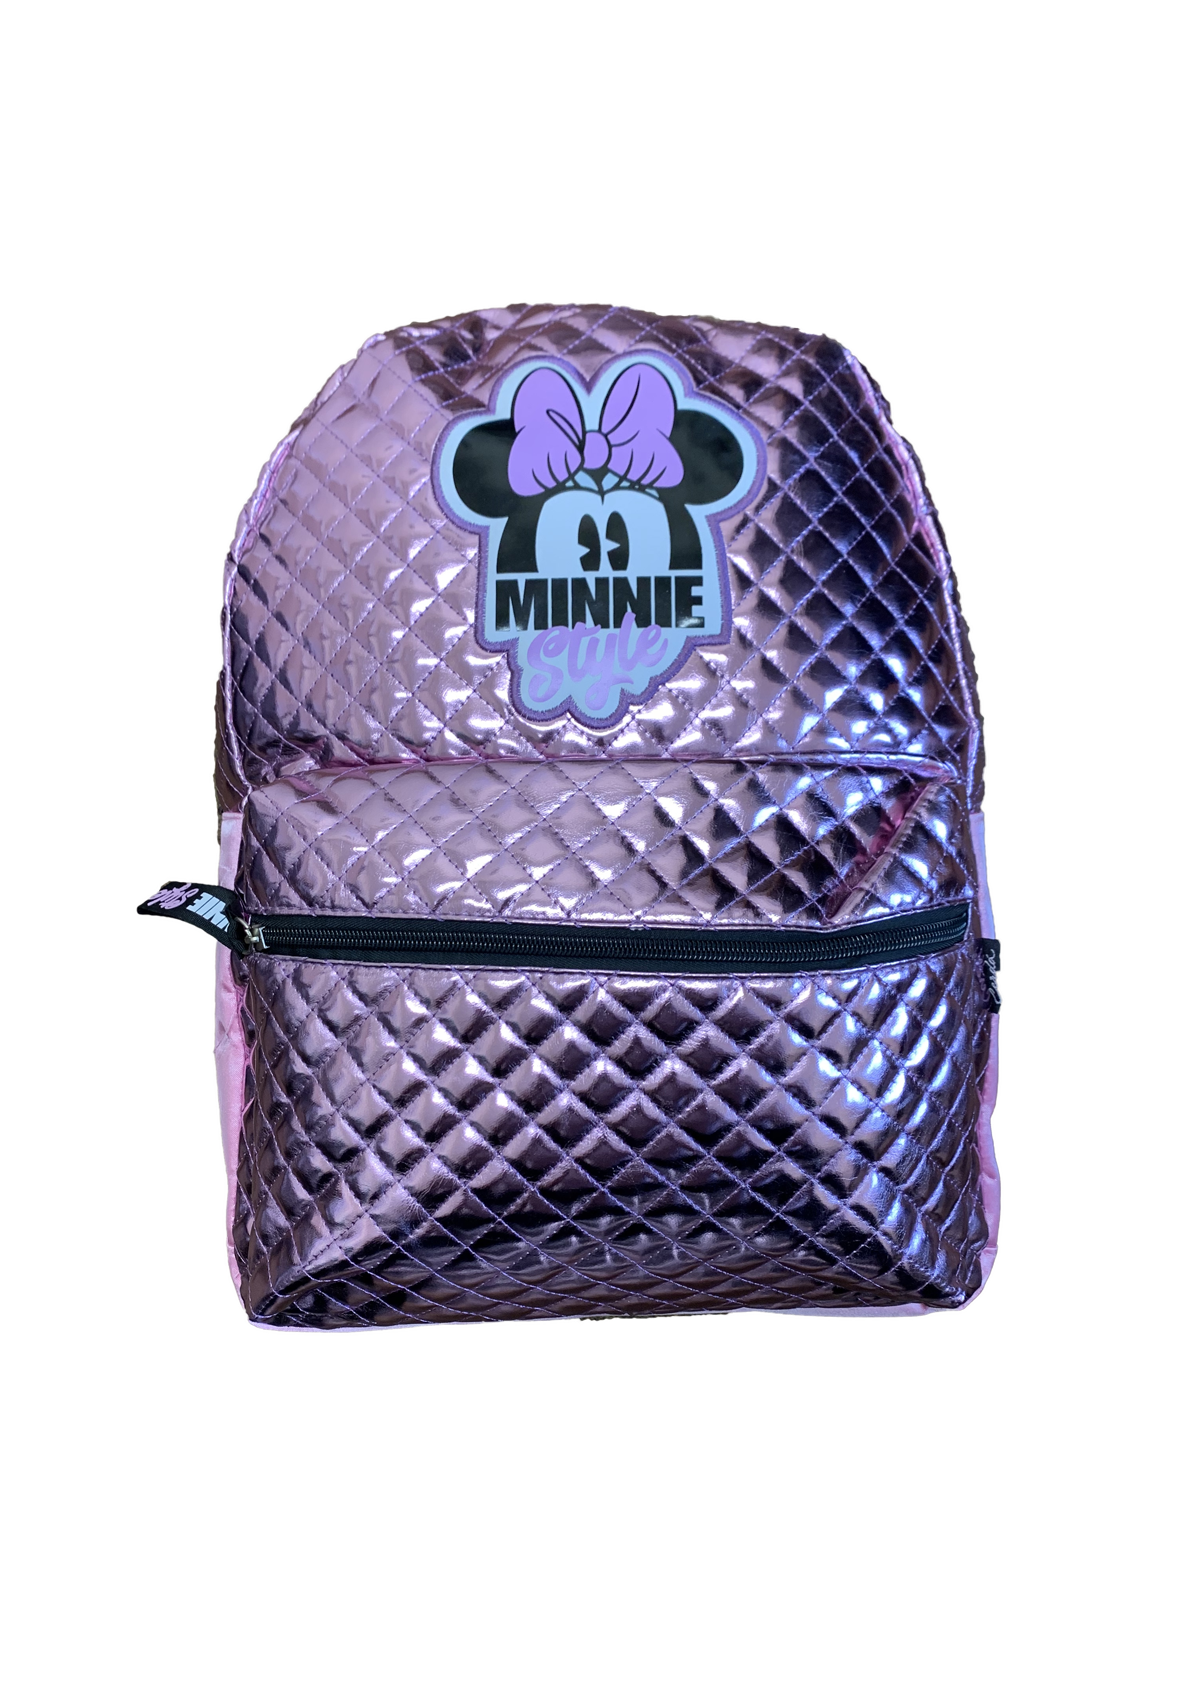 Minnie Mouse Large Backpack